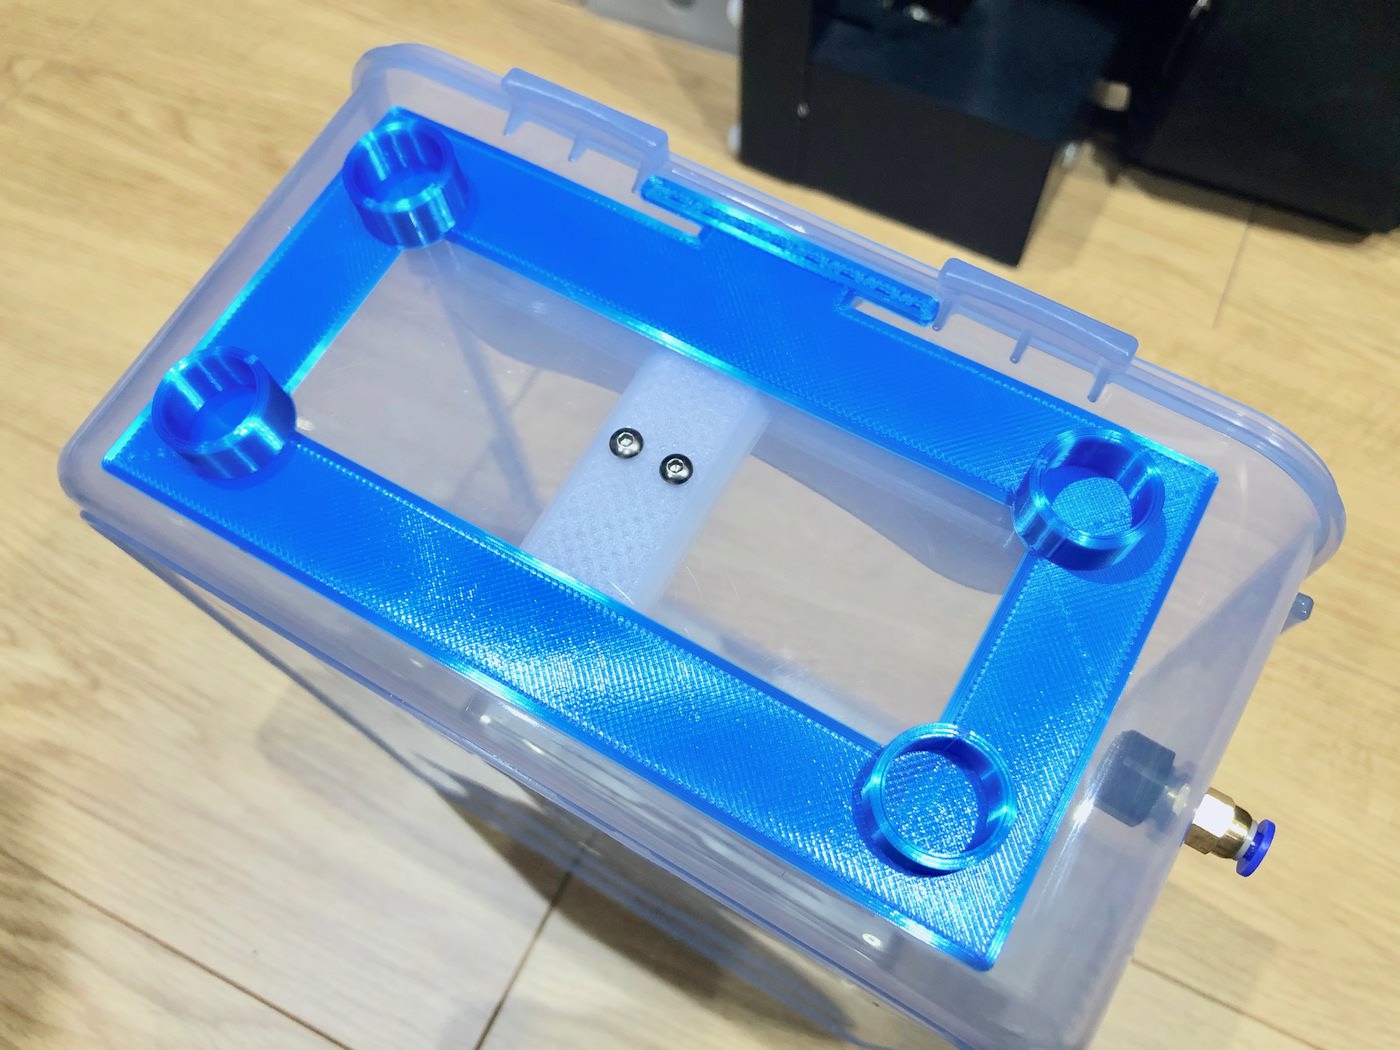 A dry box with a filament delivery function made using an airtight container from daiso 00030